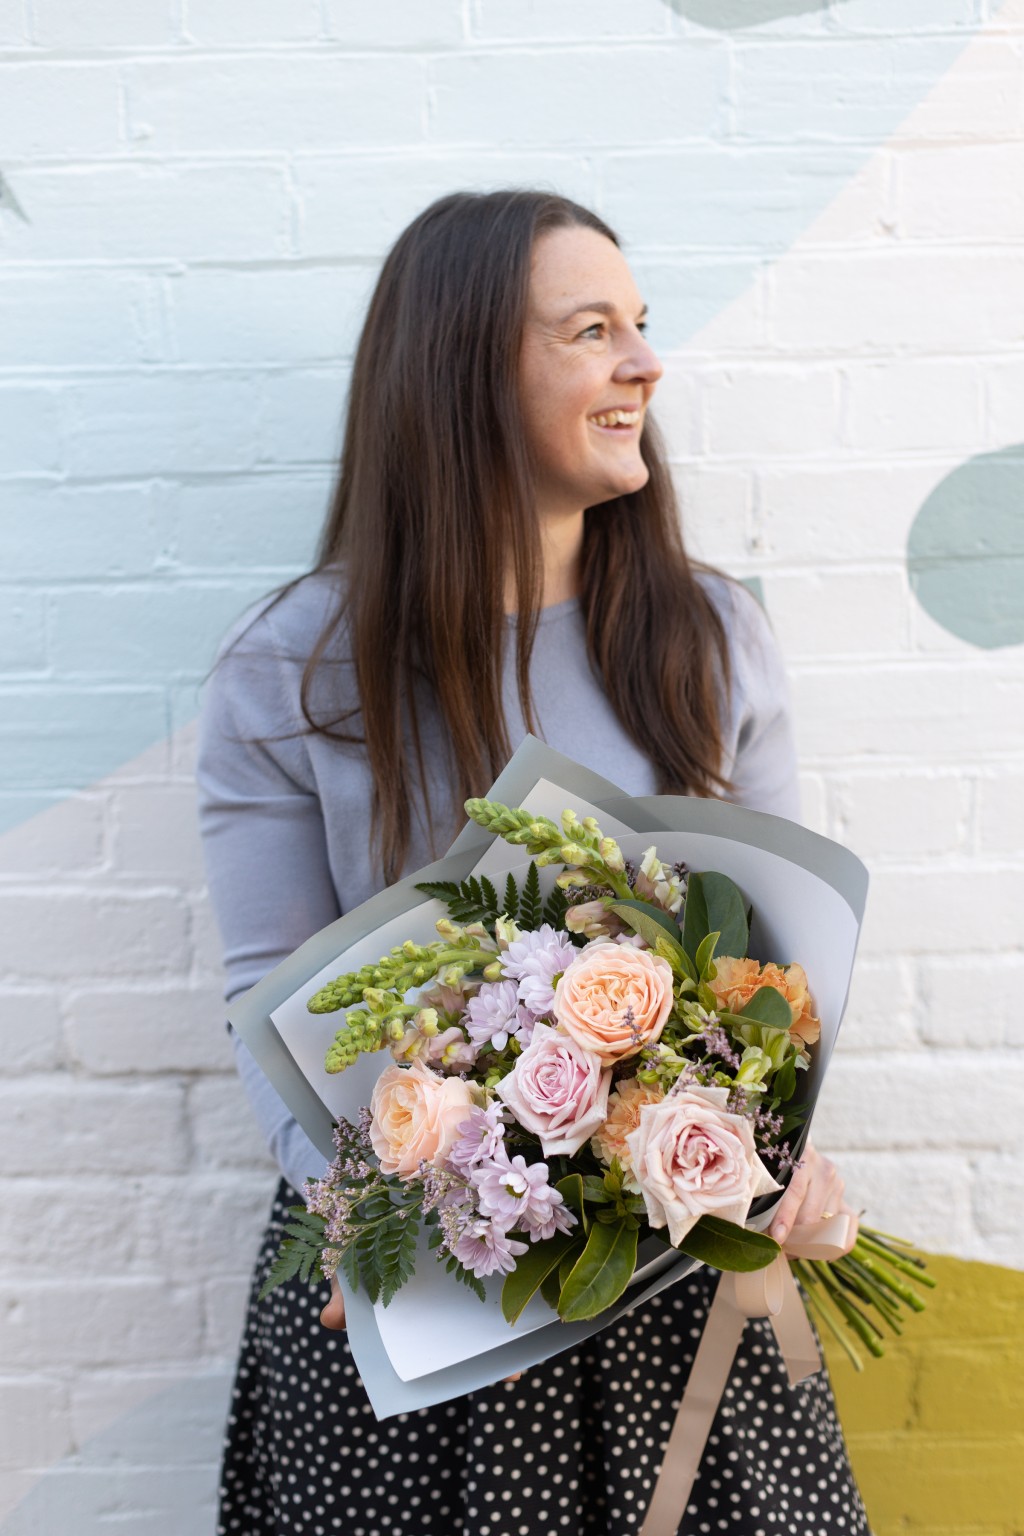 Florist holding a large bouquet of beautiful flowers to be delivered in Wagga Wagga